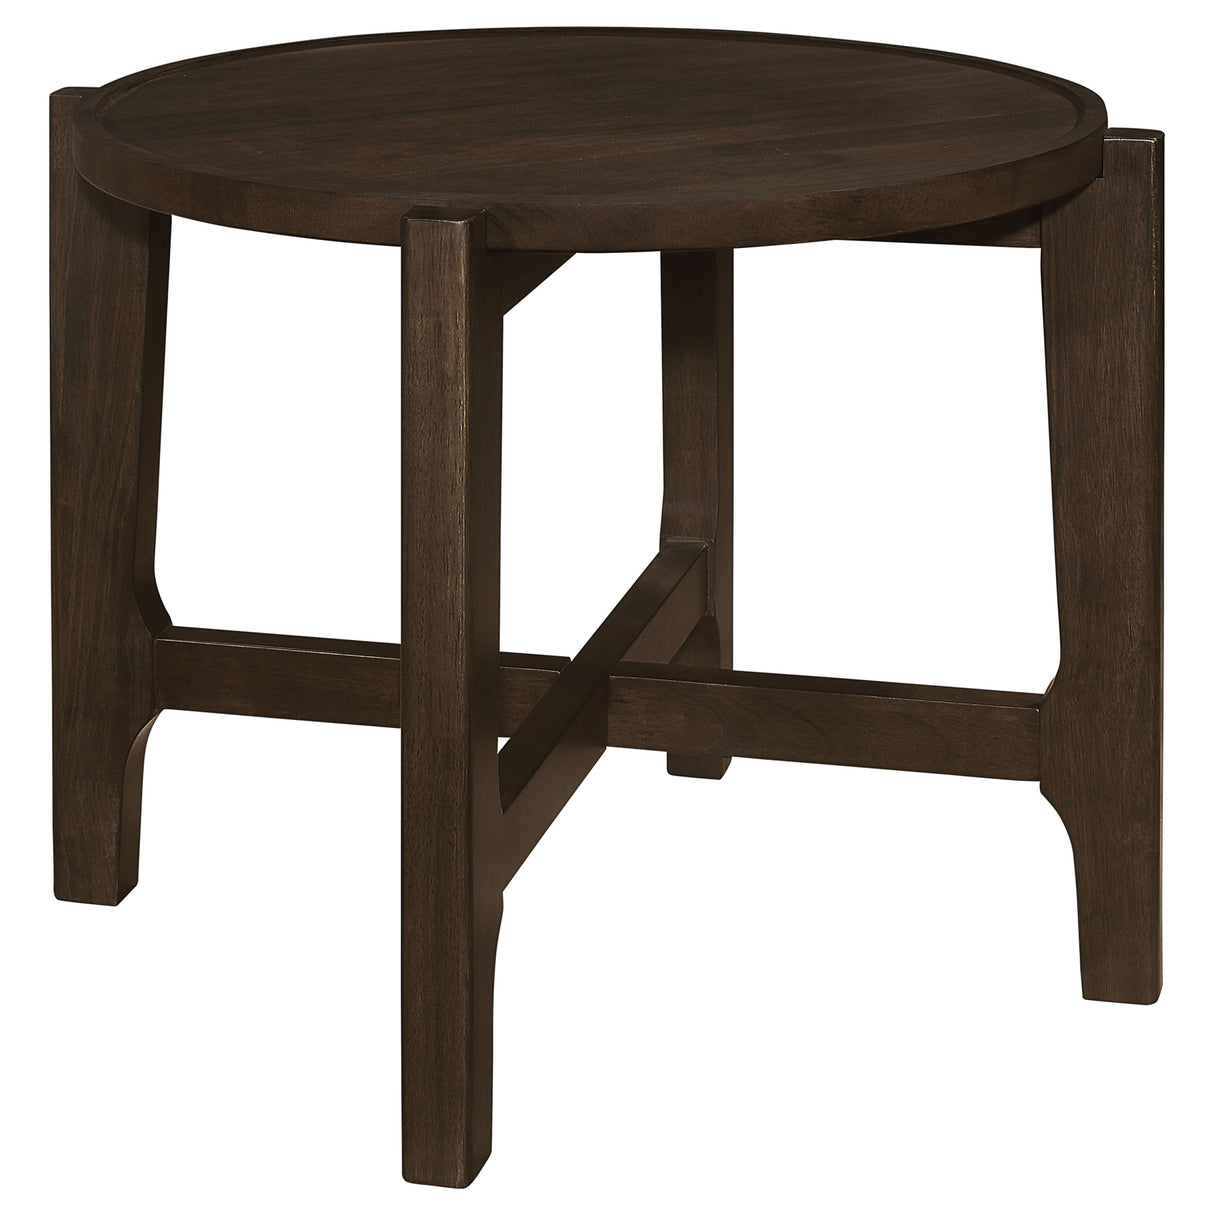 End Table - Cota Round Solid Wood End Table Dark Brown